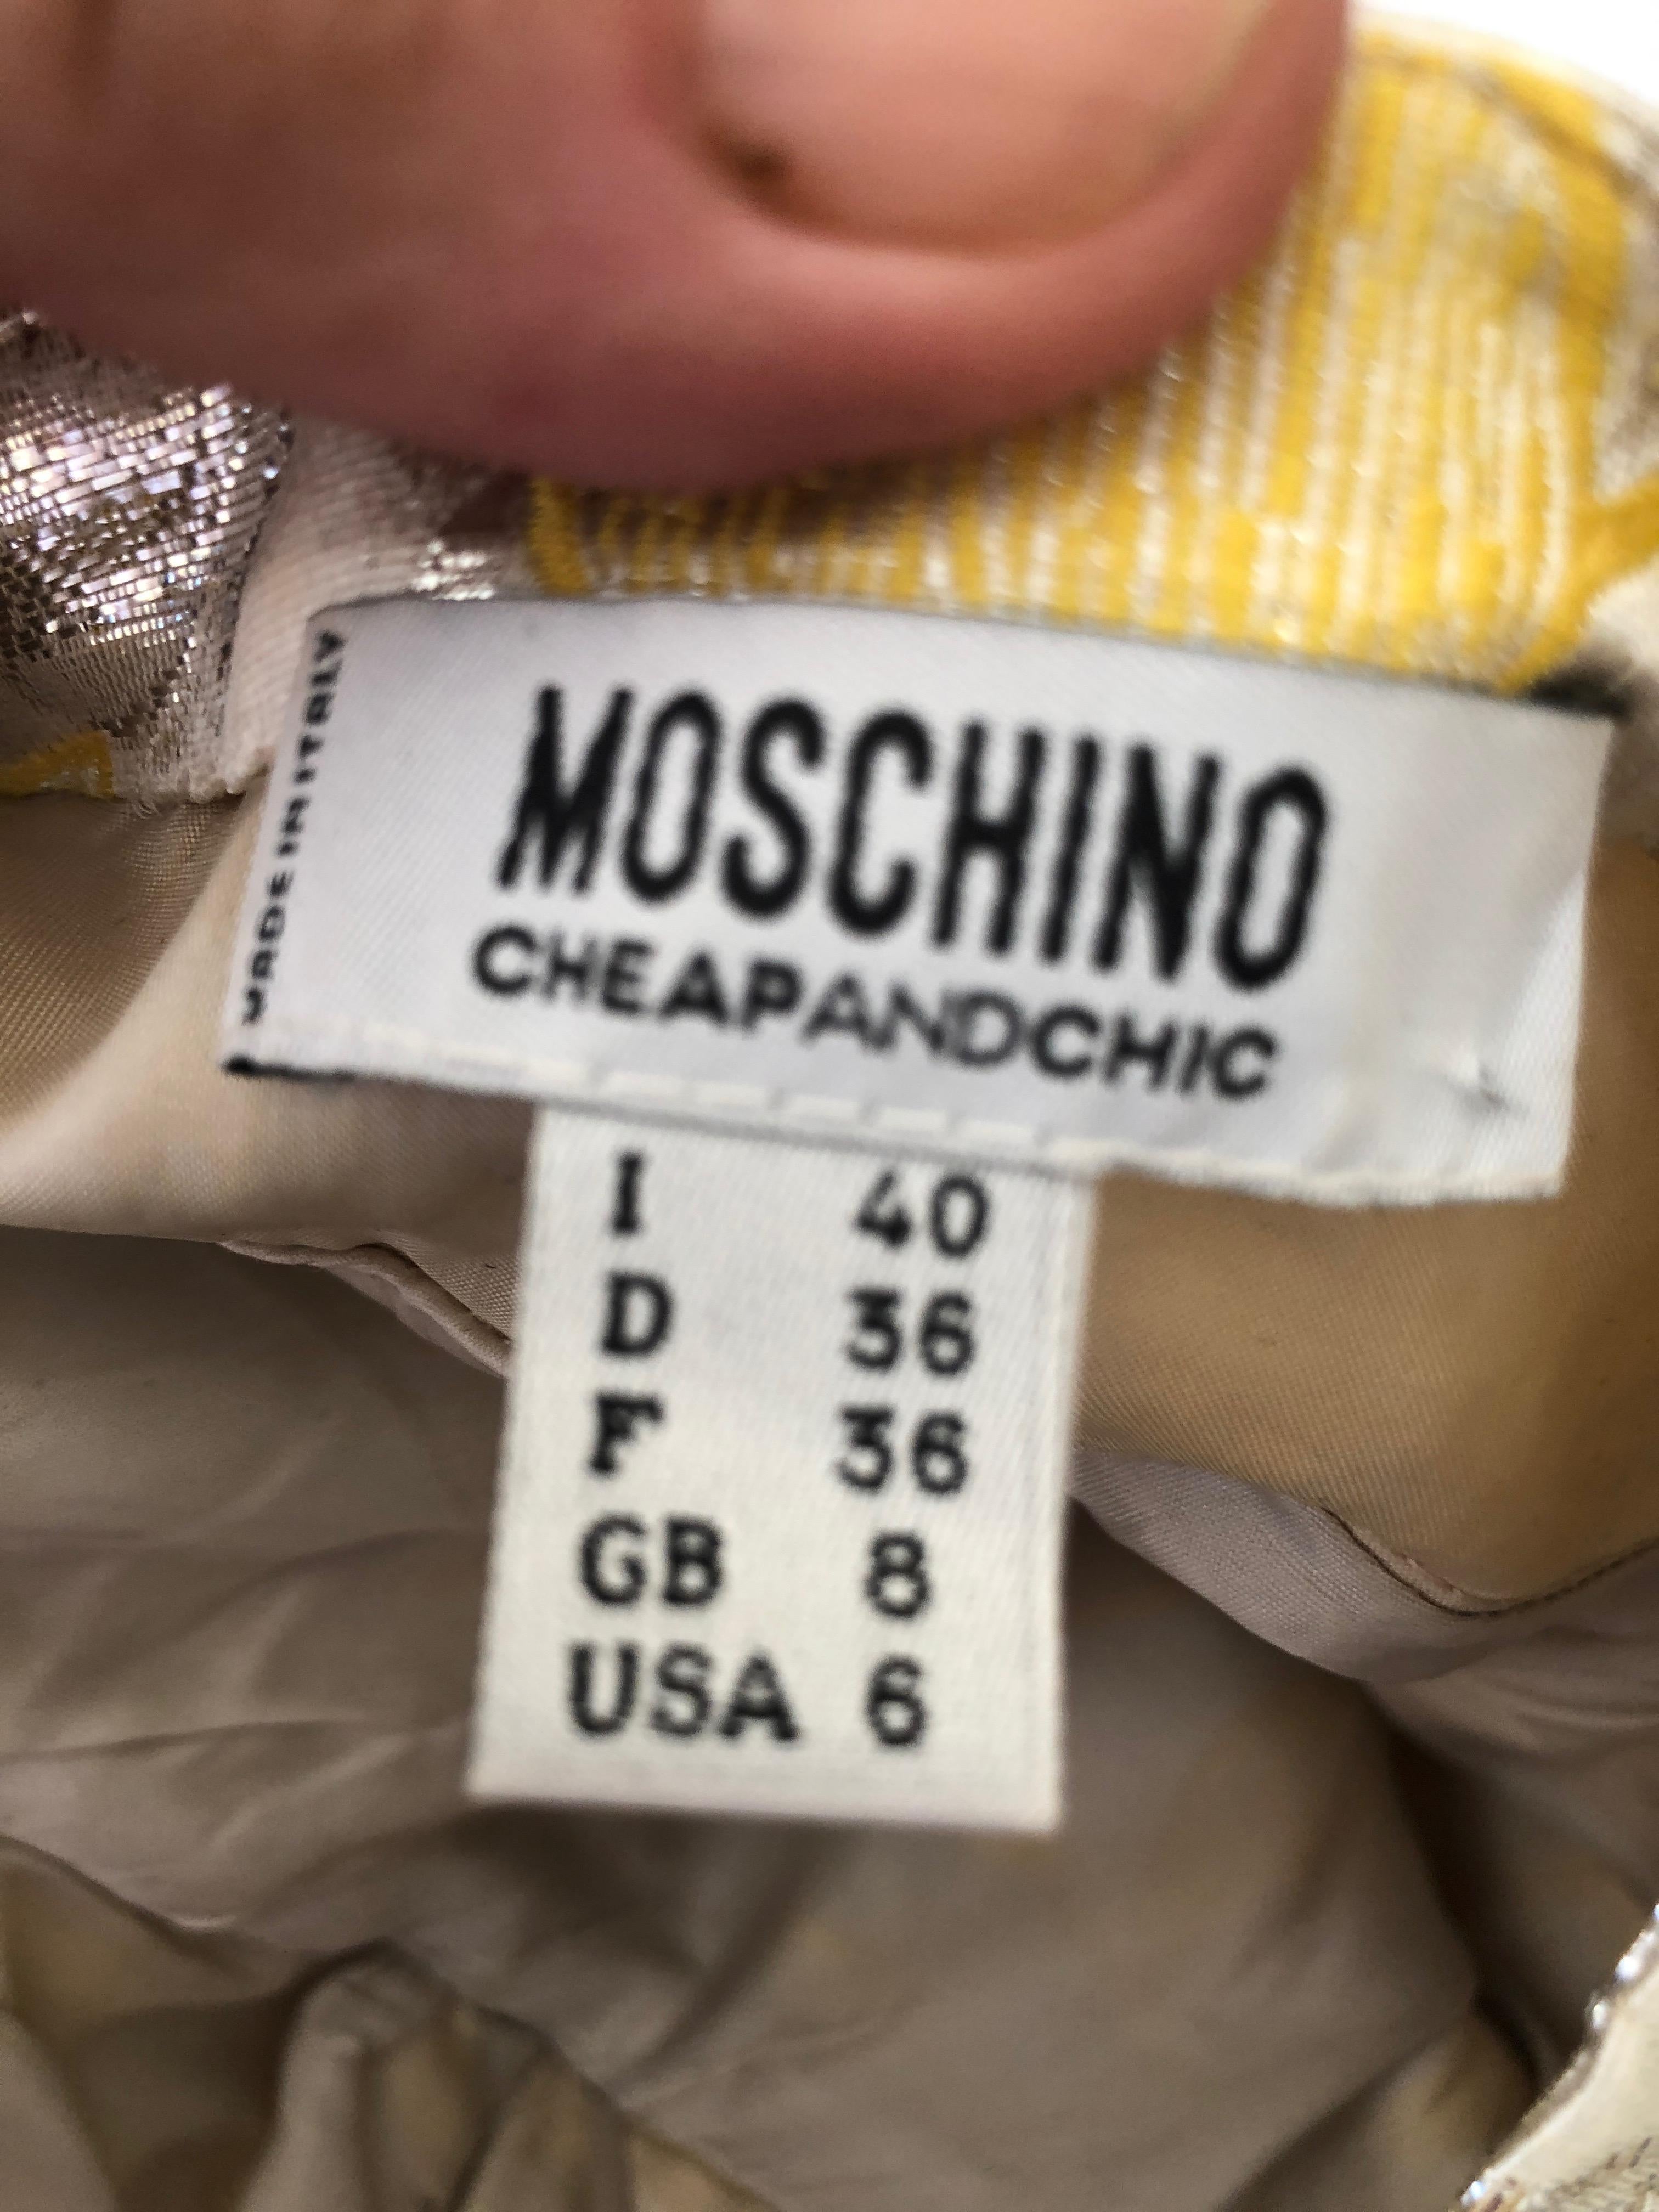 Moschino Cheap & Chic Vintage Silver Brocade Yellow Leaf Pattern Cocktail Dress For Sale 3